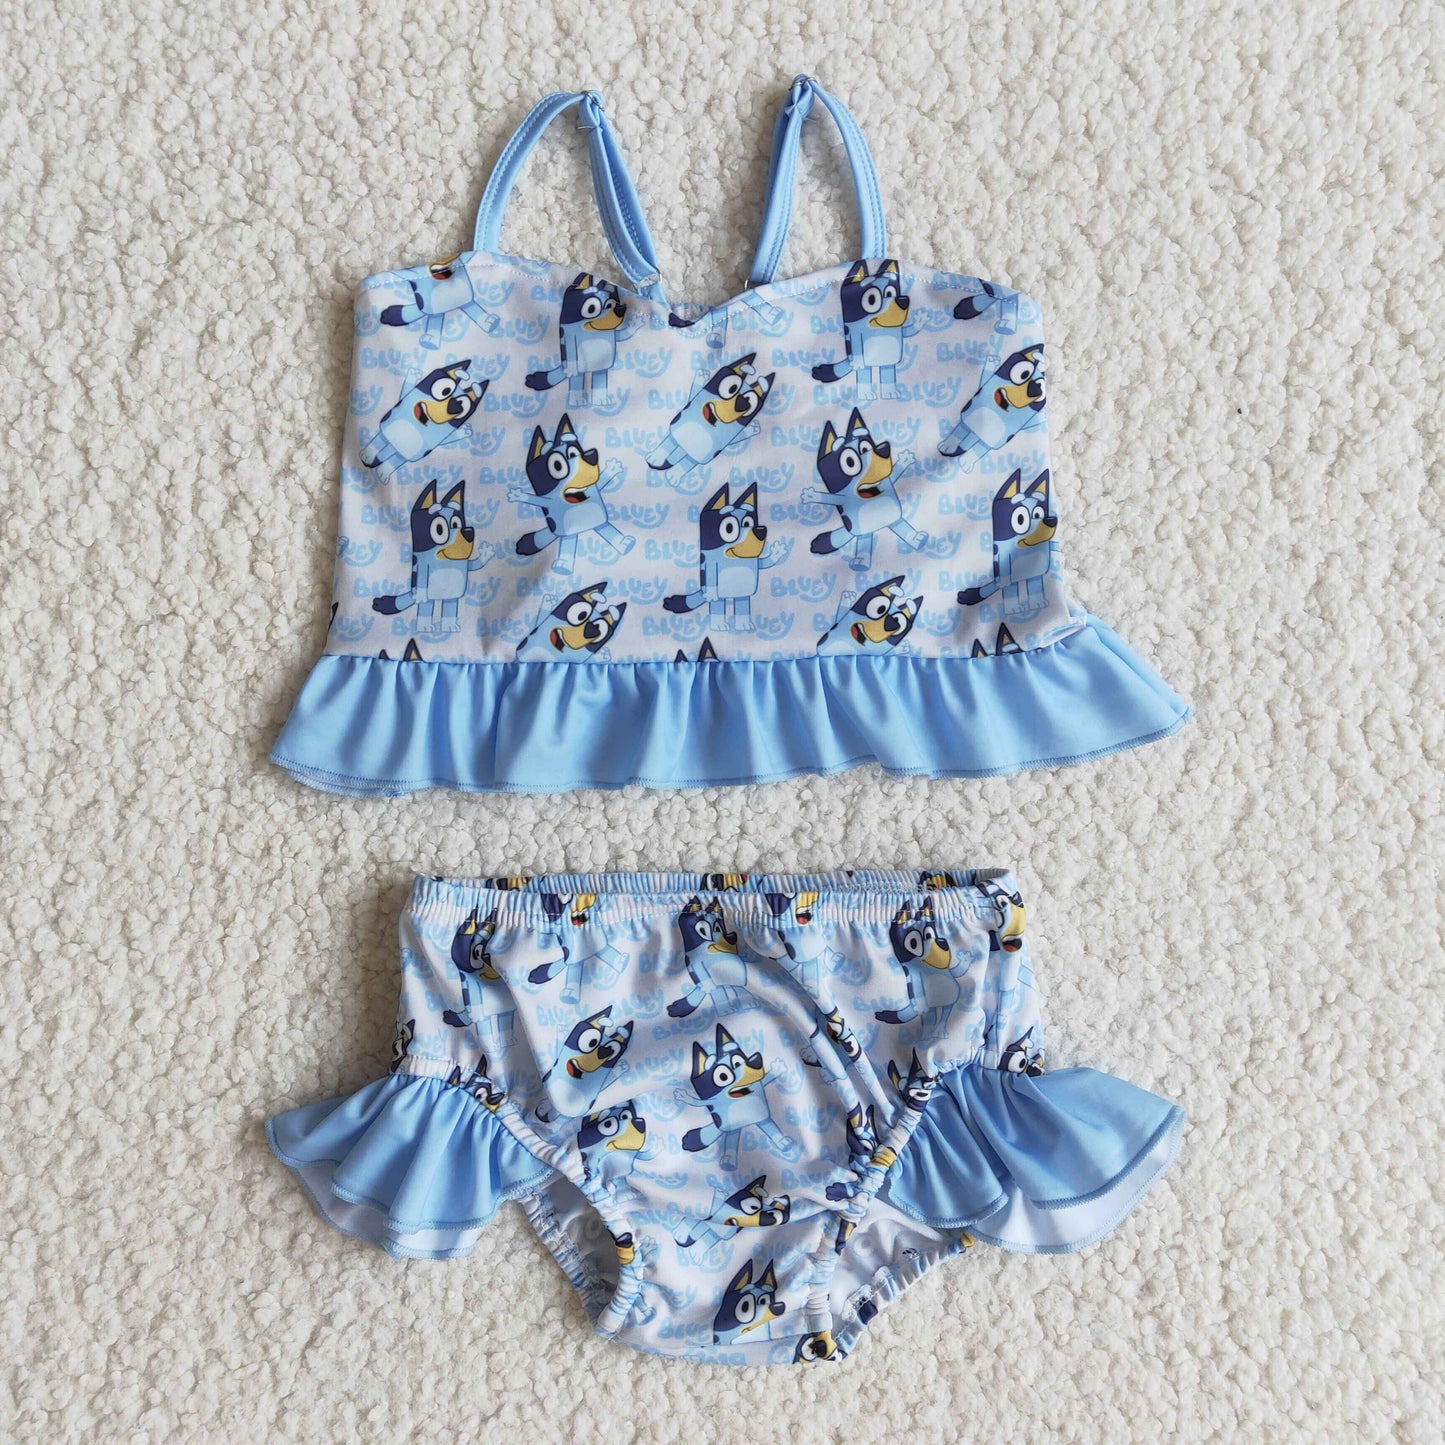 E10-19 Suspender Summer Swimsuit Outfit